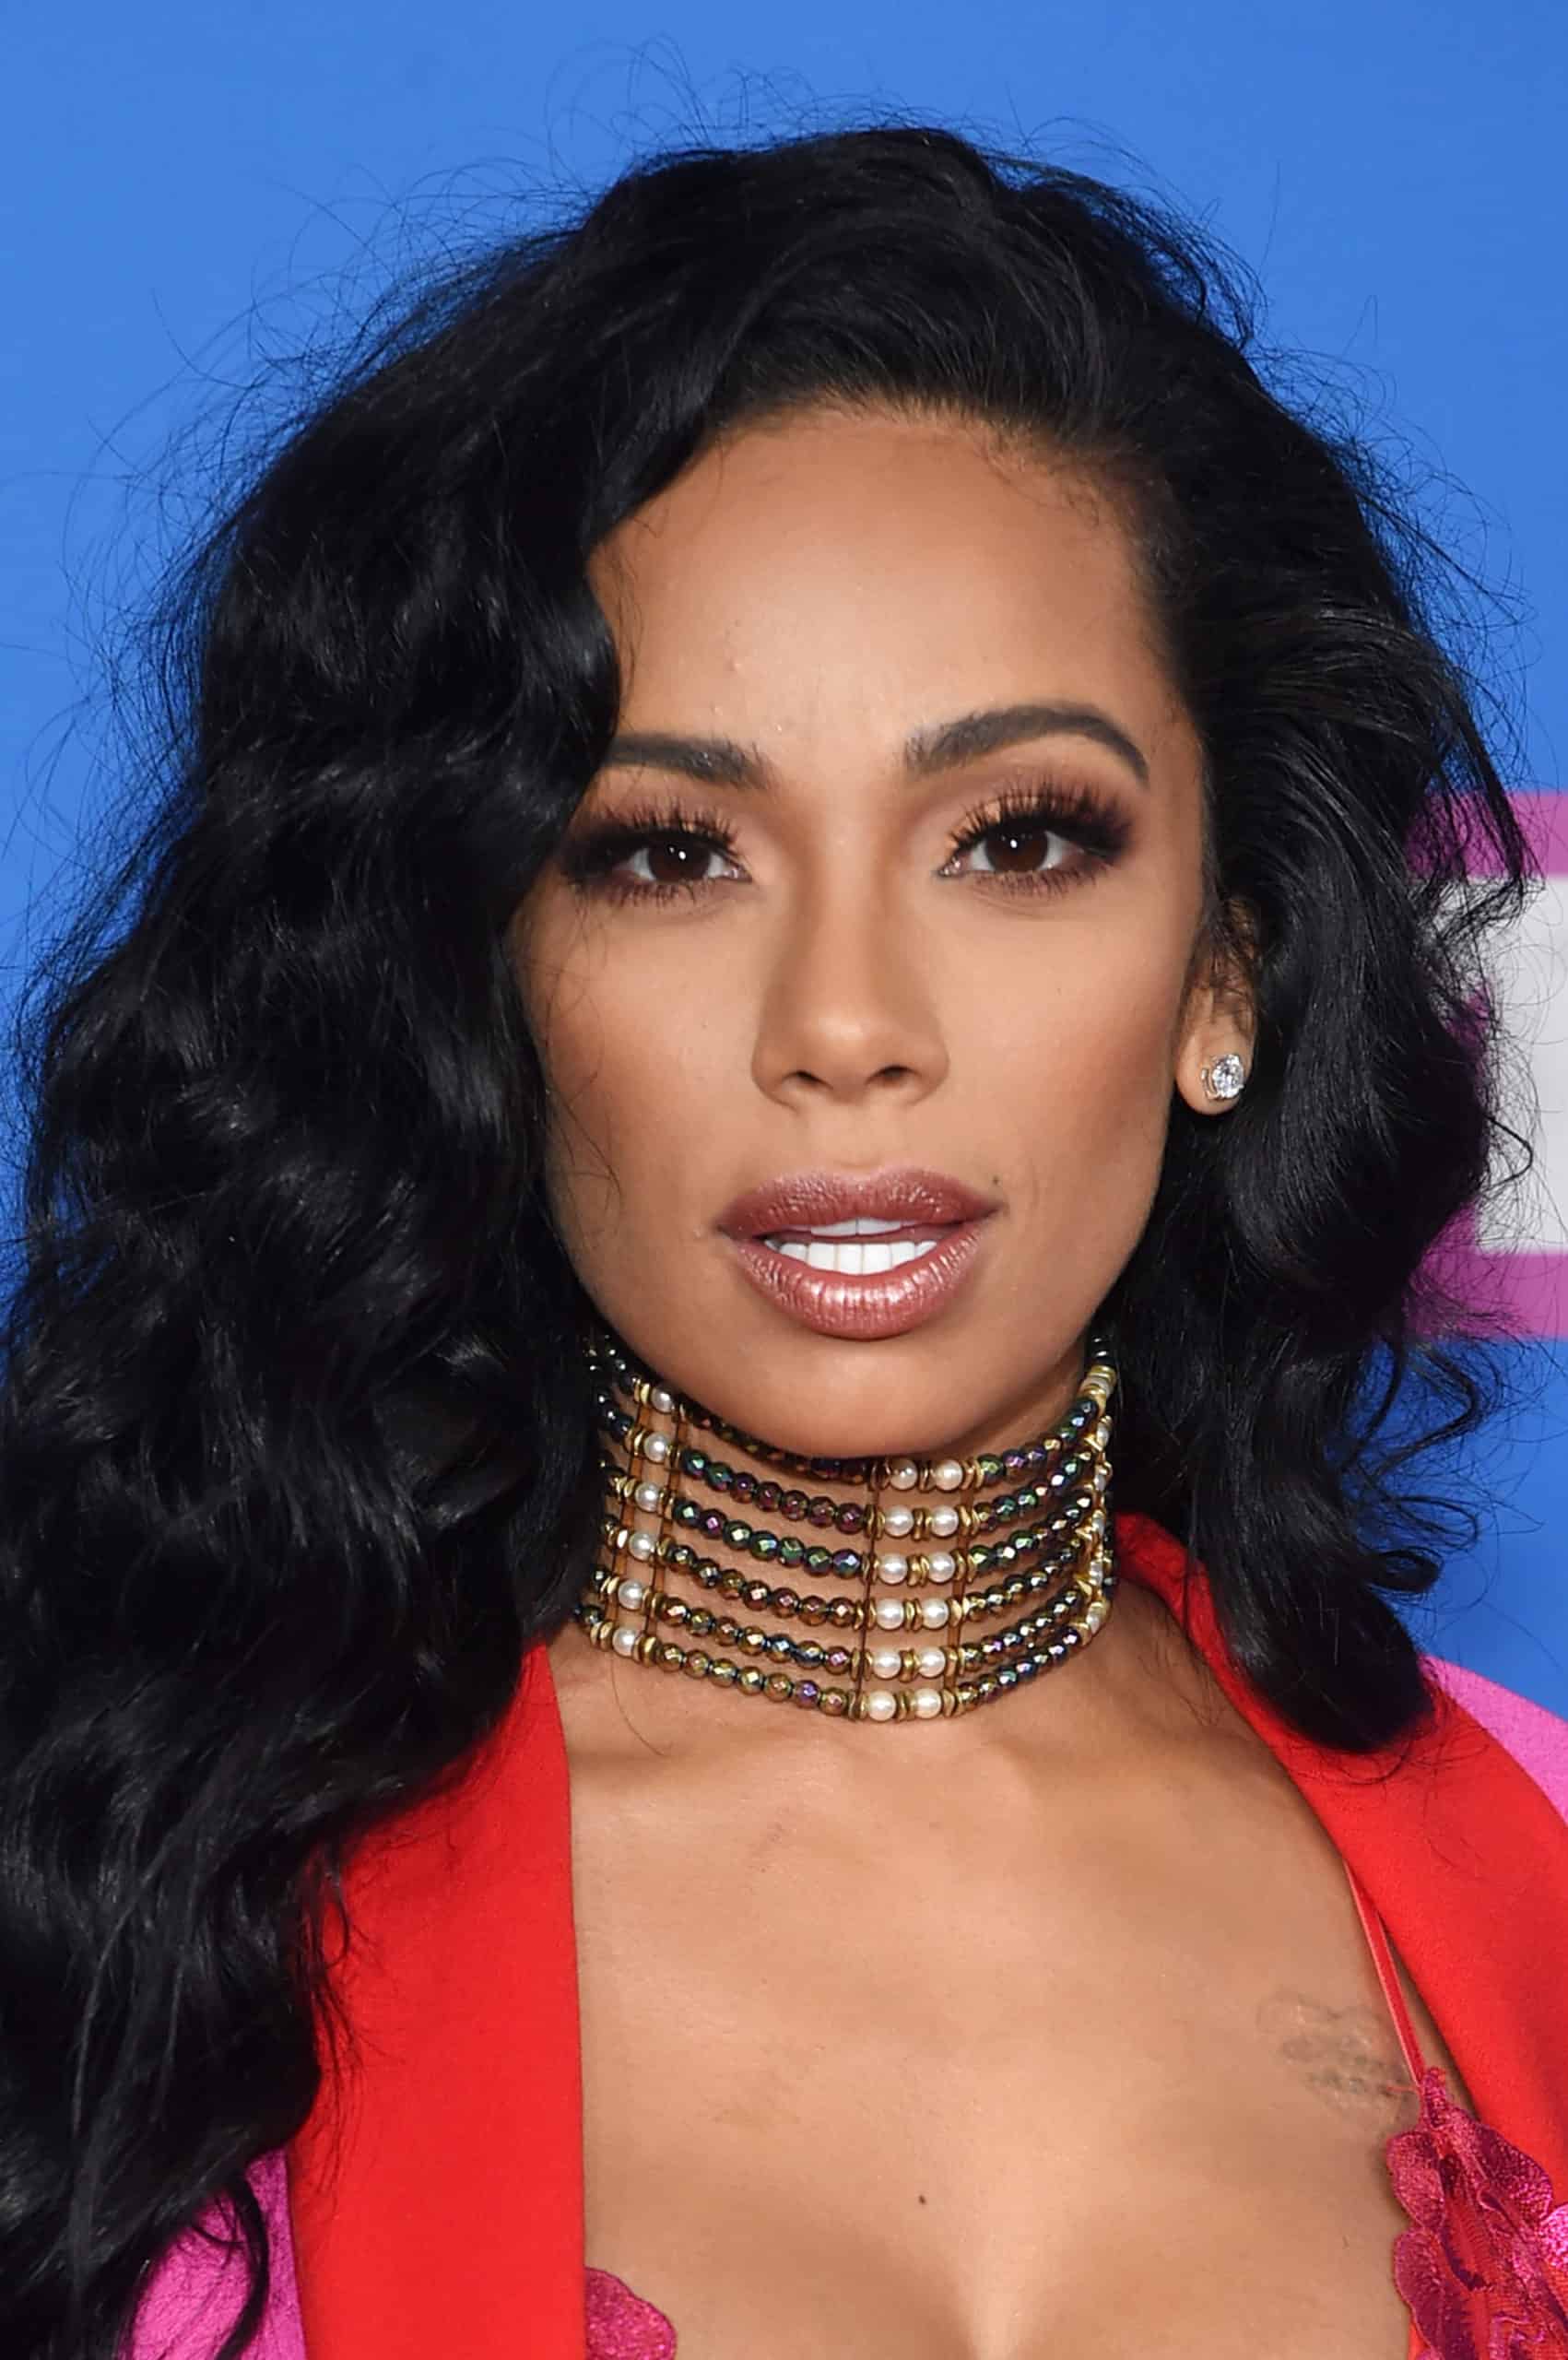 Erica Mena released a lovely new video of her child after a recent